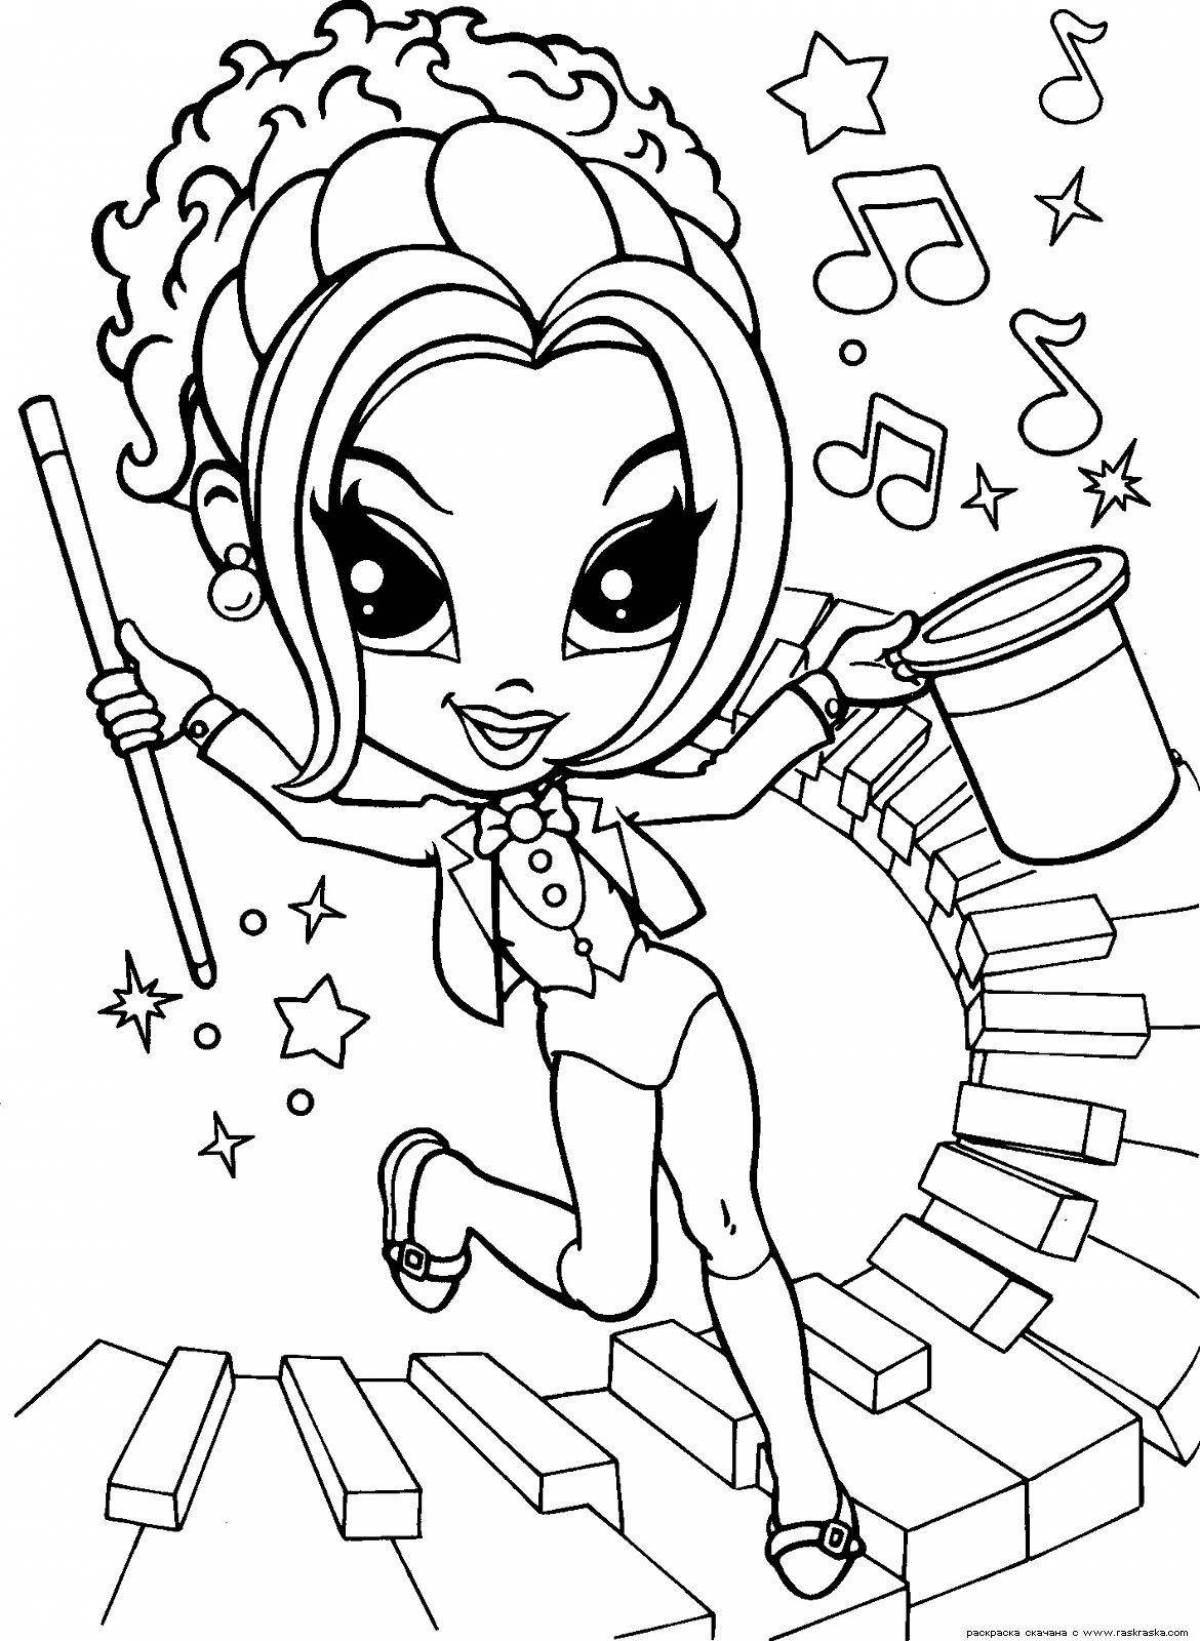 Blissful coloring page 12 for girls